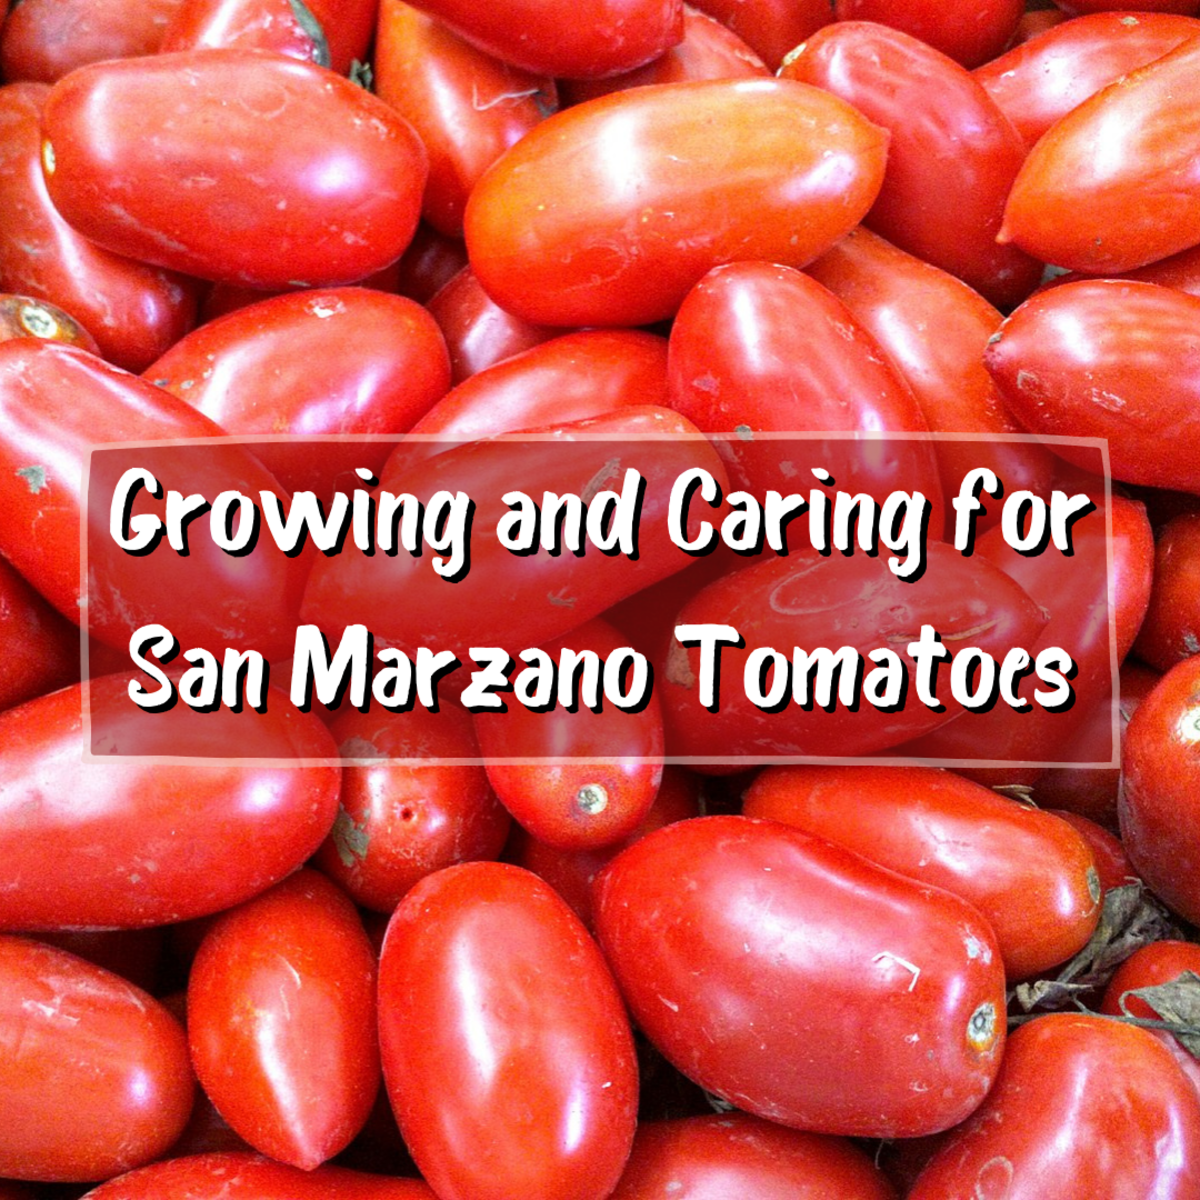 The San Marzano tomato is one of the best varieties available. Learn all about growing San Marzano tomatoes in this article.